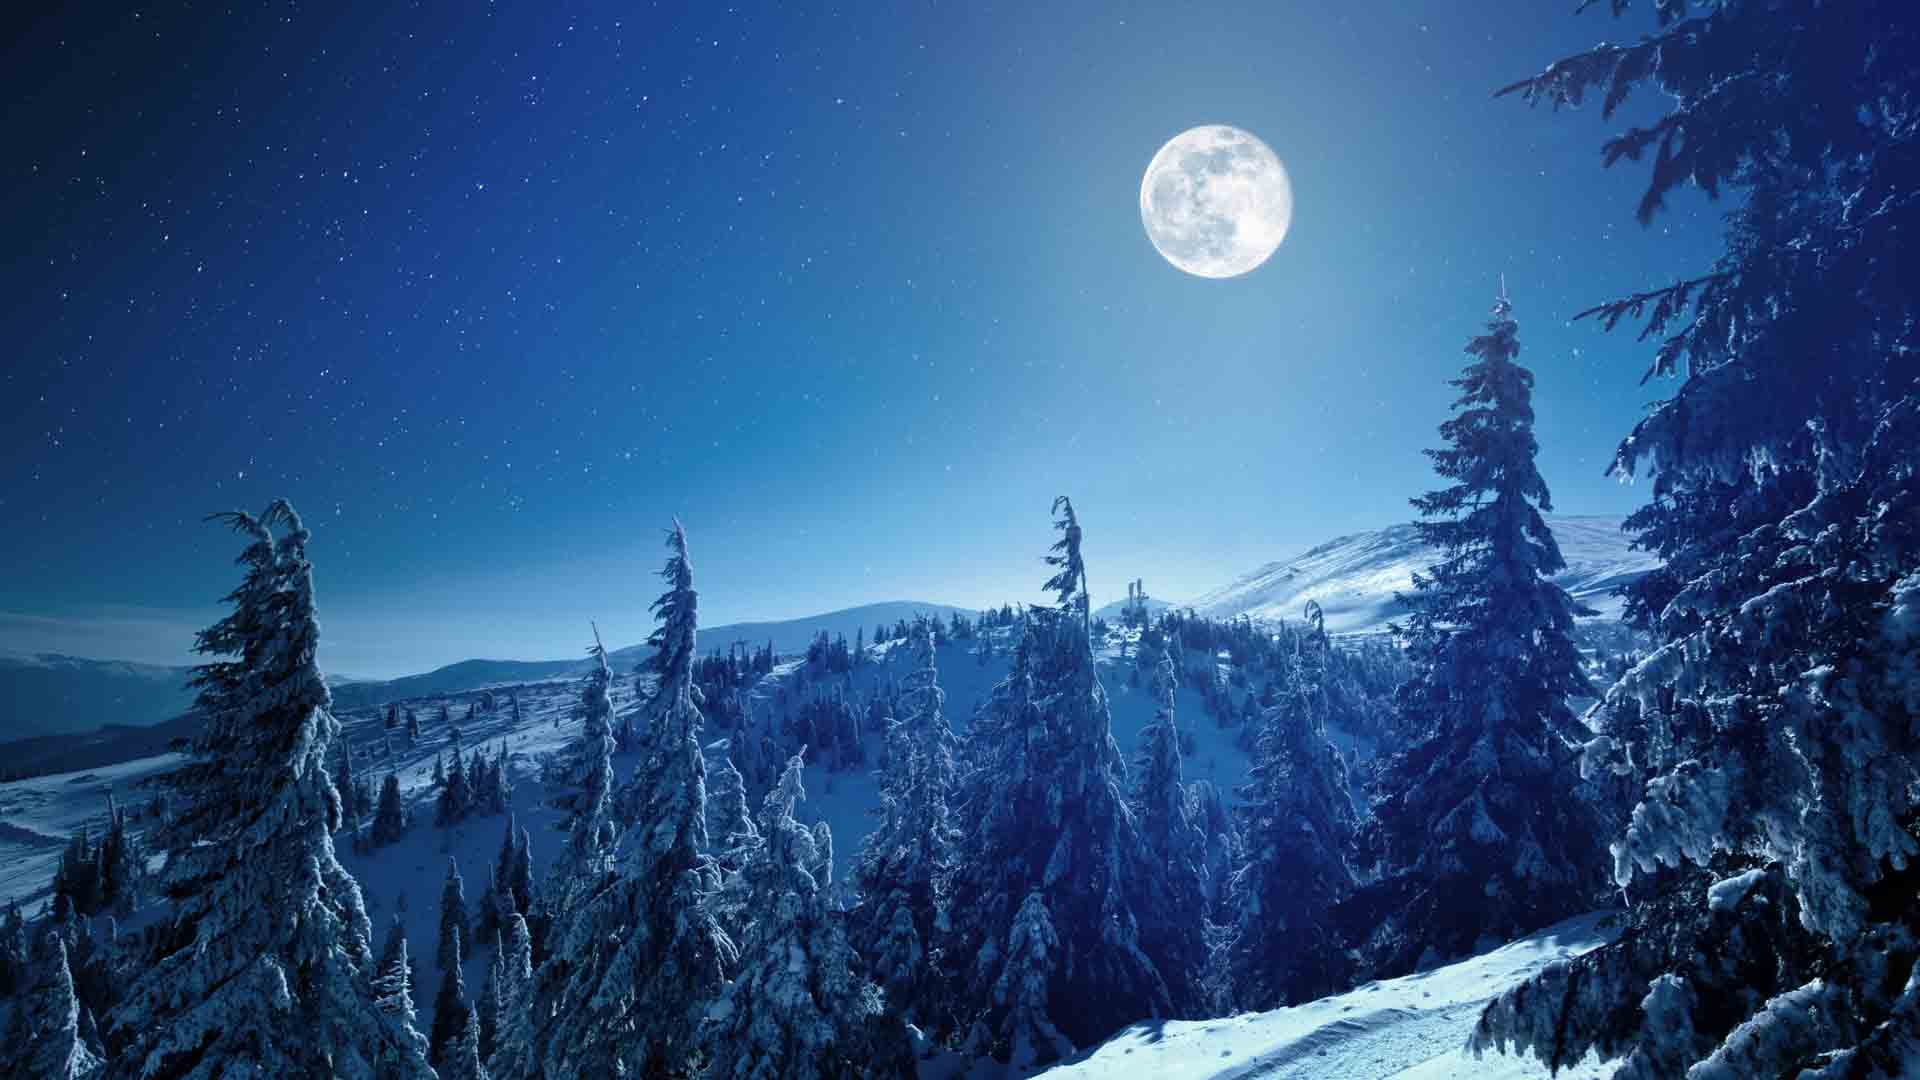 Full Moon over the winter forest